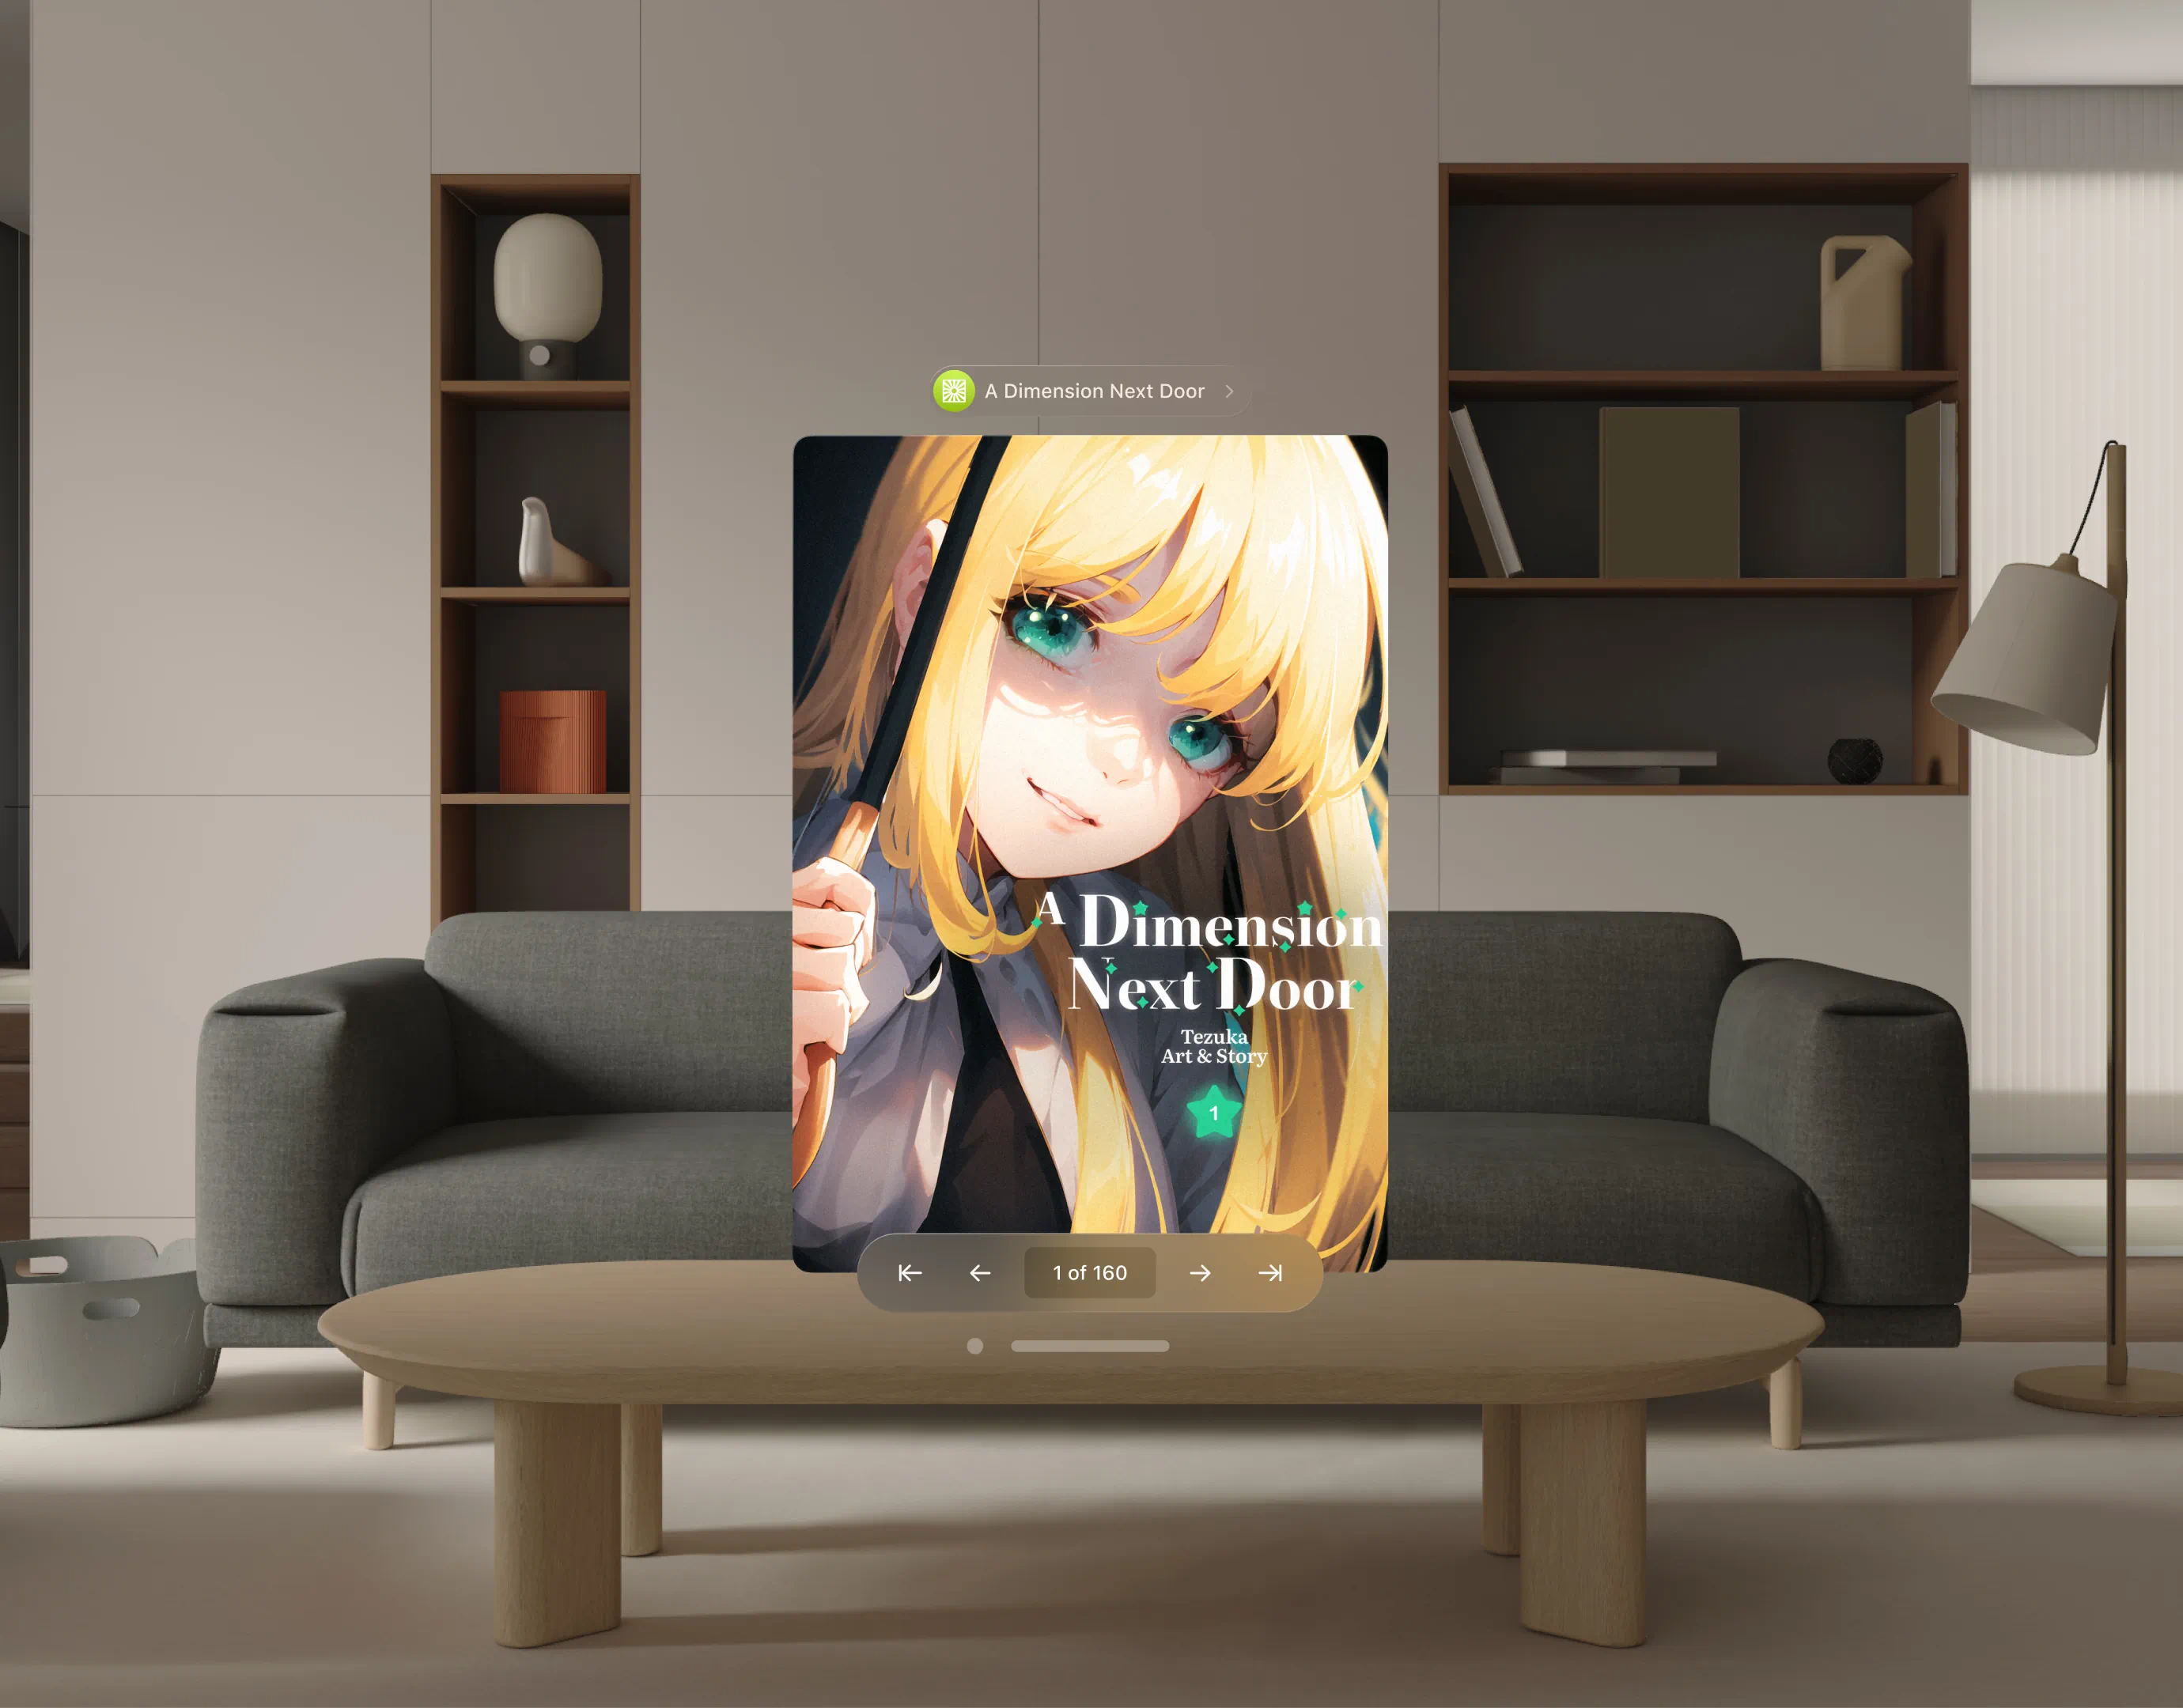 Mockup of an Apple Vision Pro app named 'Tezuka Reader' displayed in a living room. The app is open and a screen is floating in the living room. The screen shows a manga cover with some page controls and a pagination indicator at the bottom. The room is furnished with a gray sofa, a wooden coffee table, and a standing lamp.